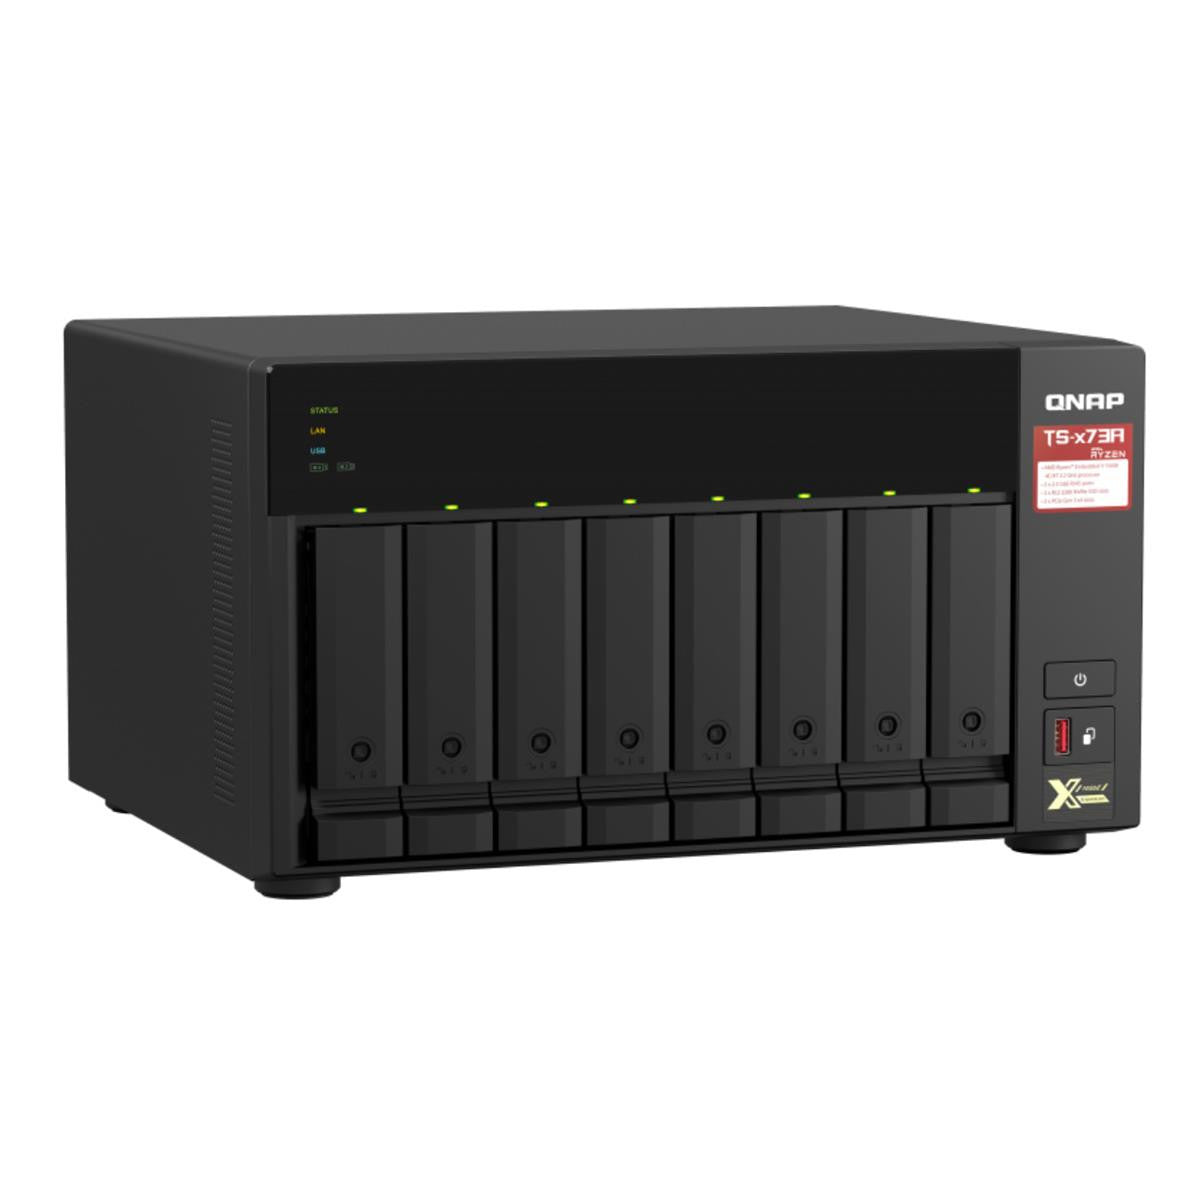 QNAP TS-873A 8-BAY NAS with 8GB DDR4 RAM and 80TB (8x10TB) Western Digital RED PLUS Drives Fully Assembled and Tested